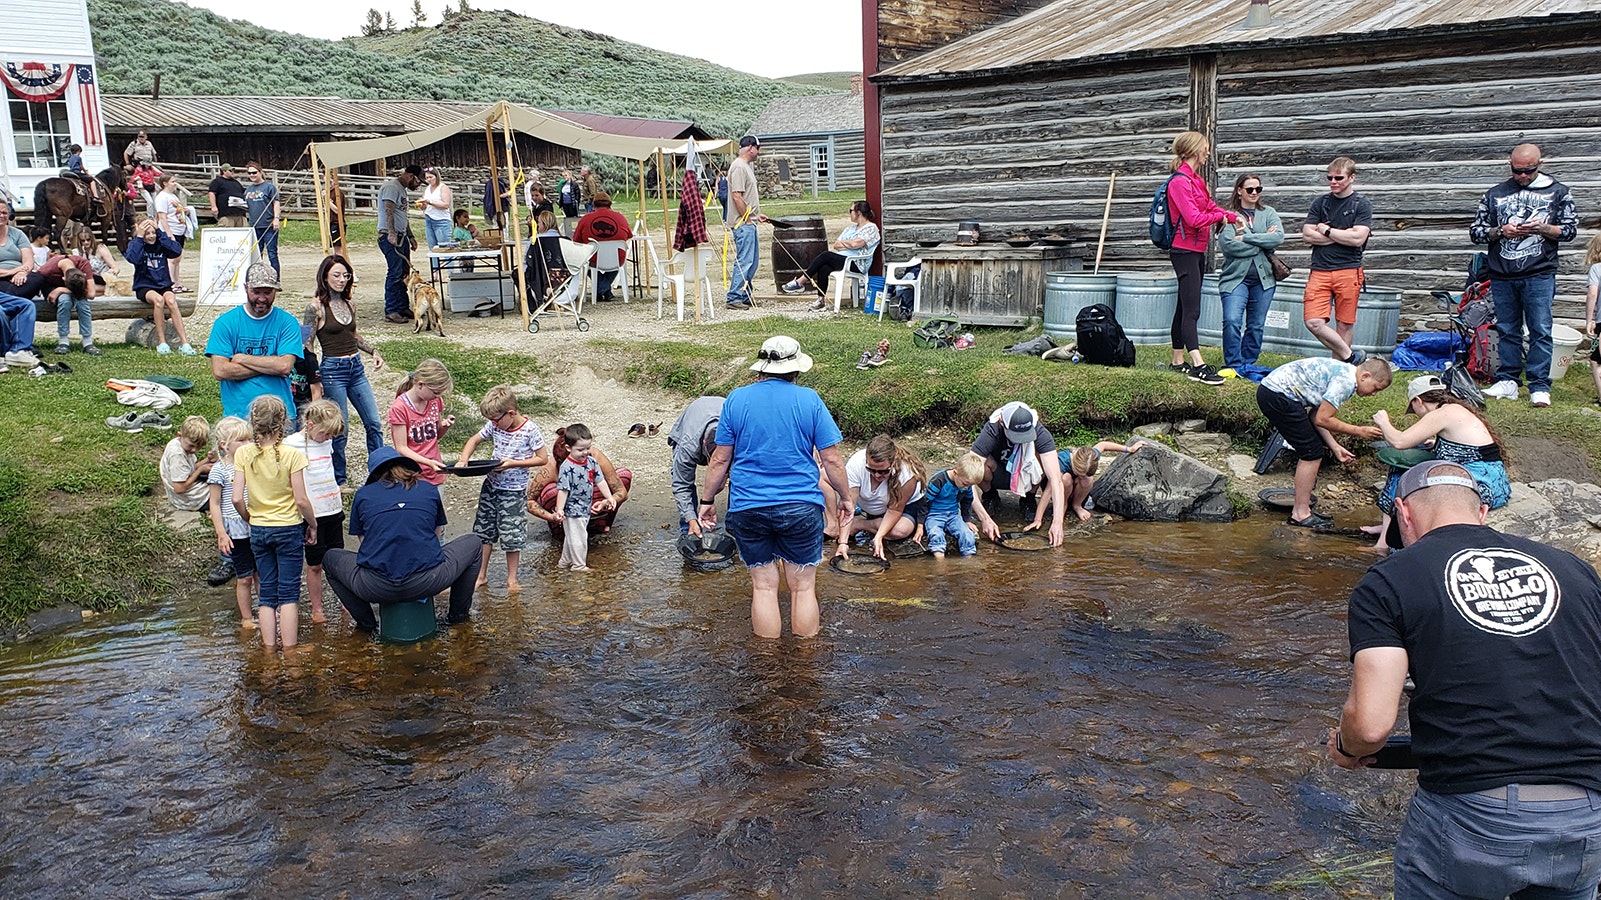 Children and adults gathered by the sides of Willow Creek recently during Gold Rush Days at South Pass City to try their hand at panning for gold.